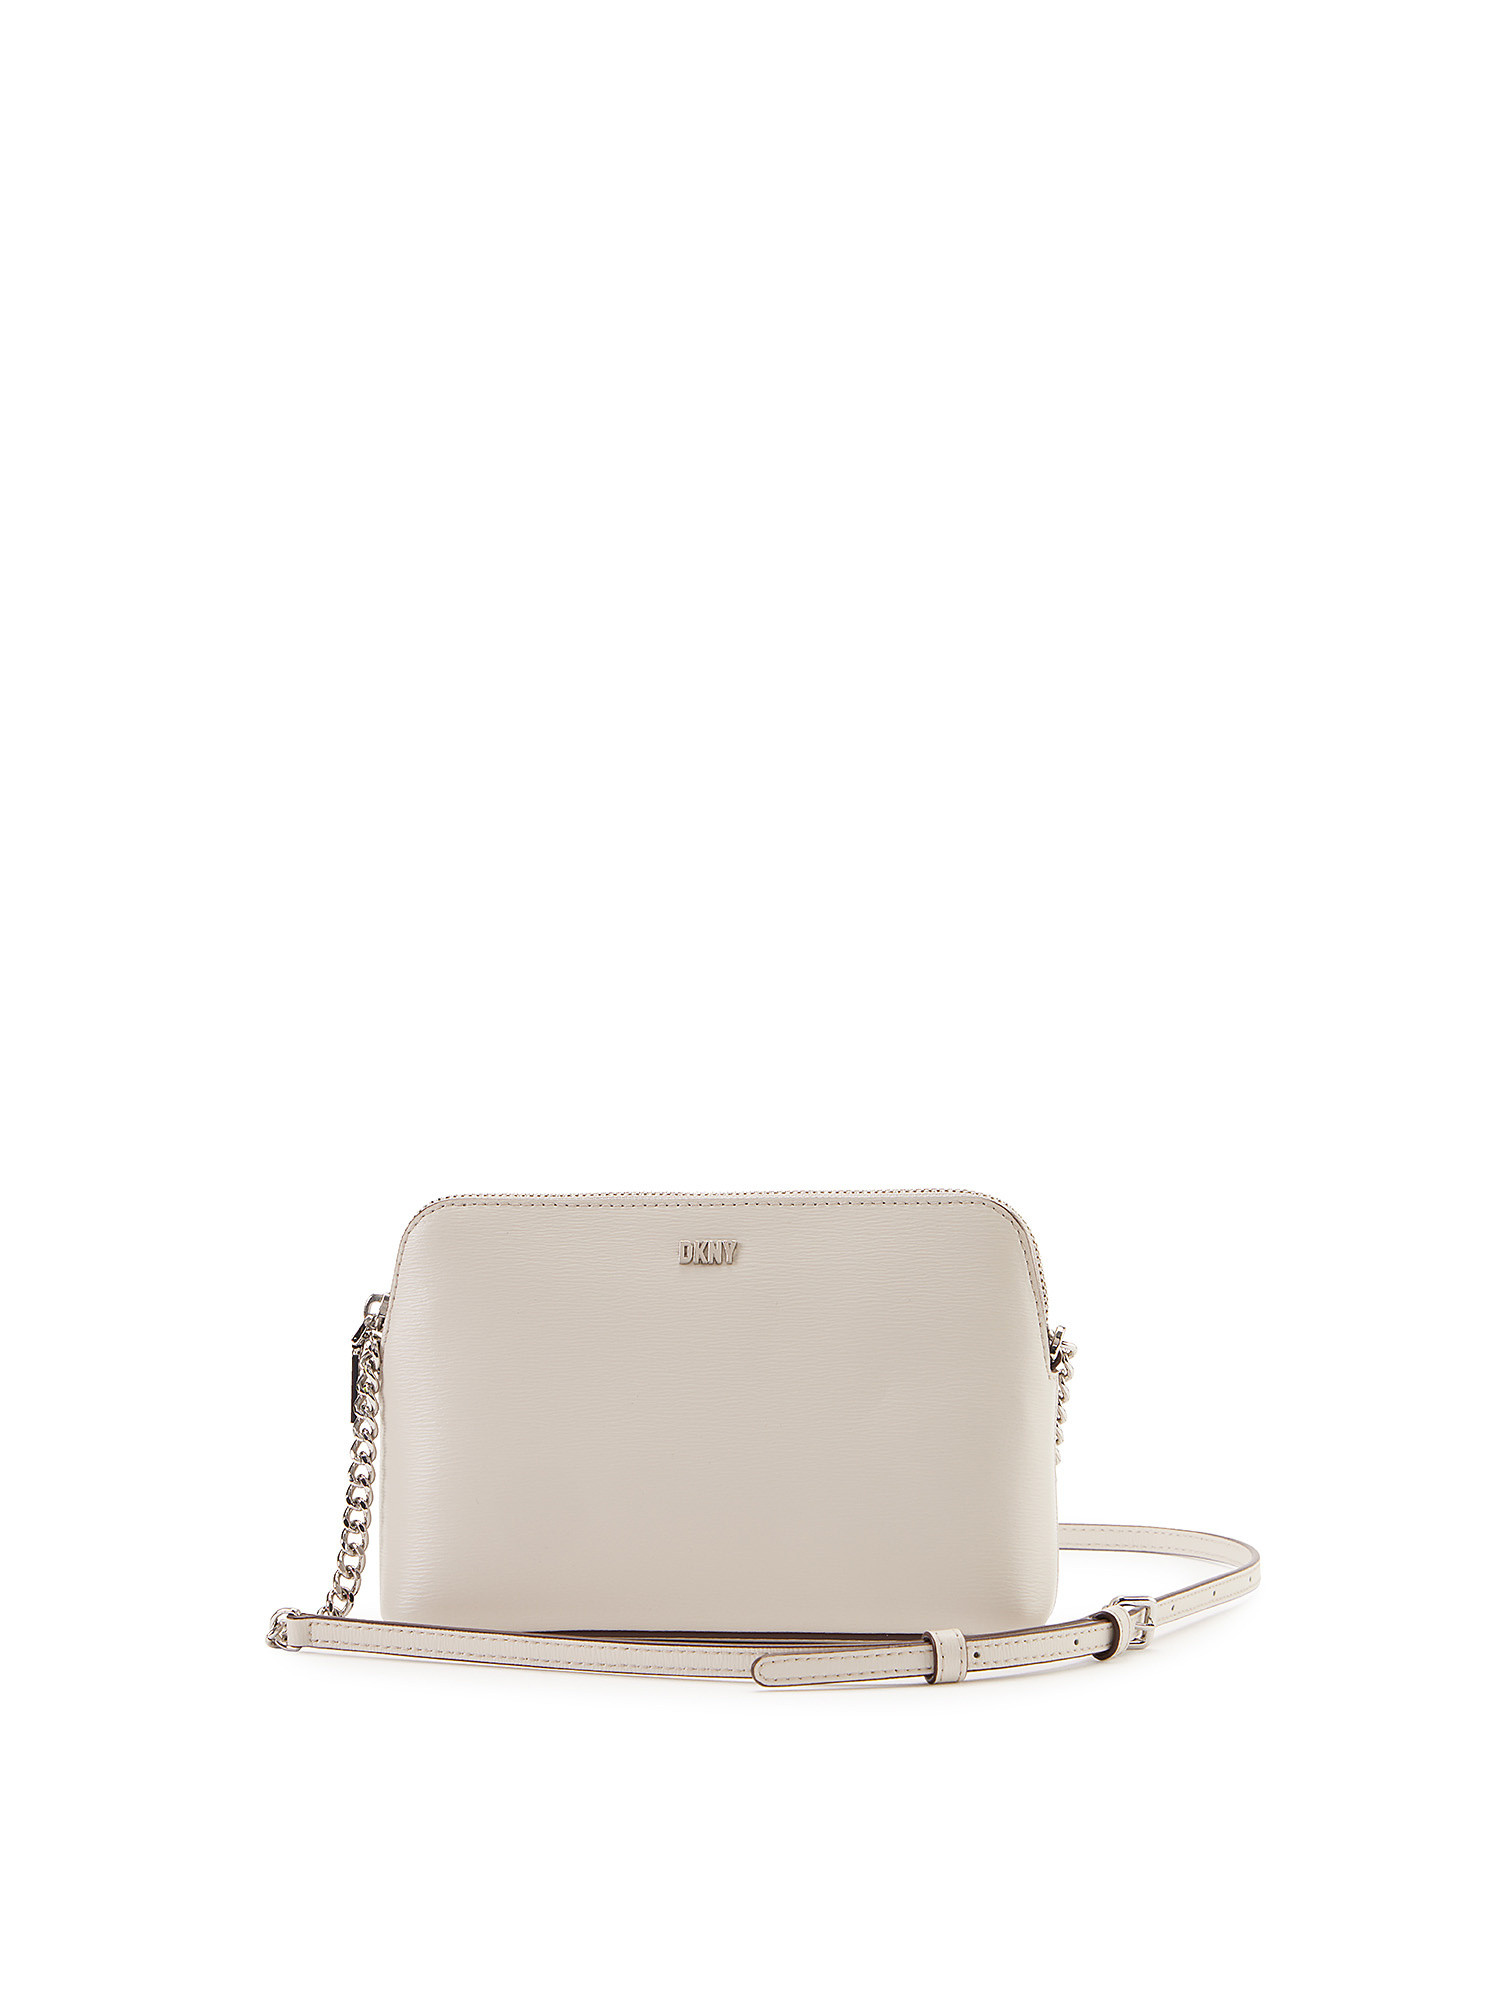 Dkny - Shoulder bag with chain and silver logo, White, large image number 0